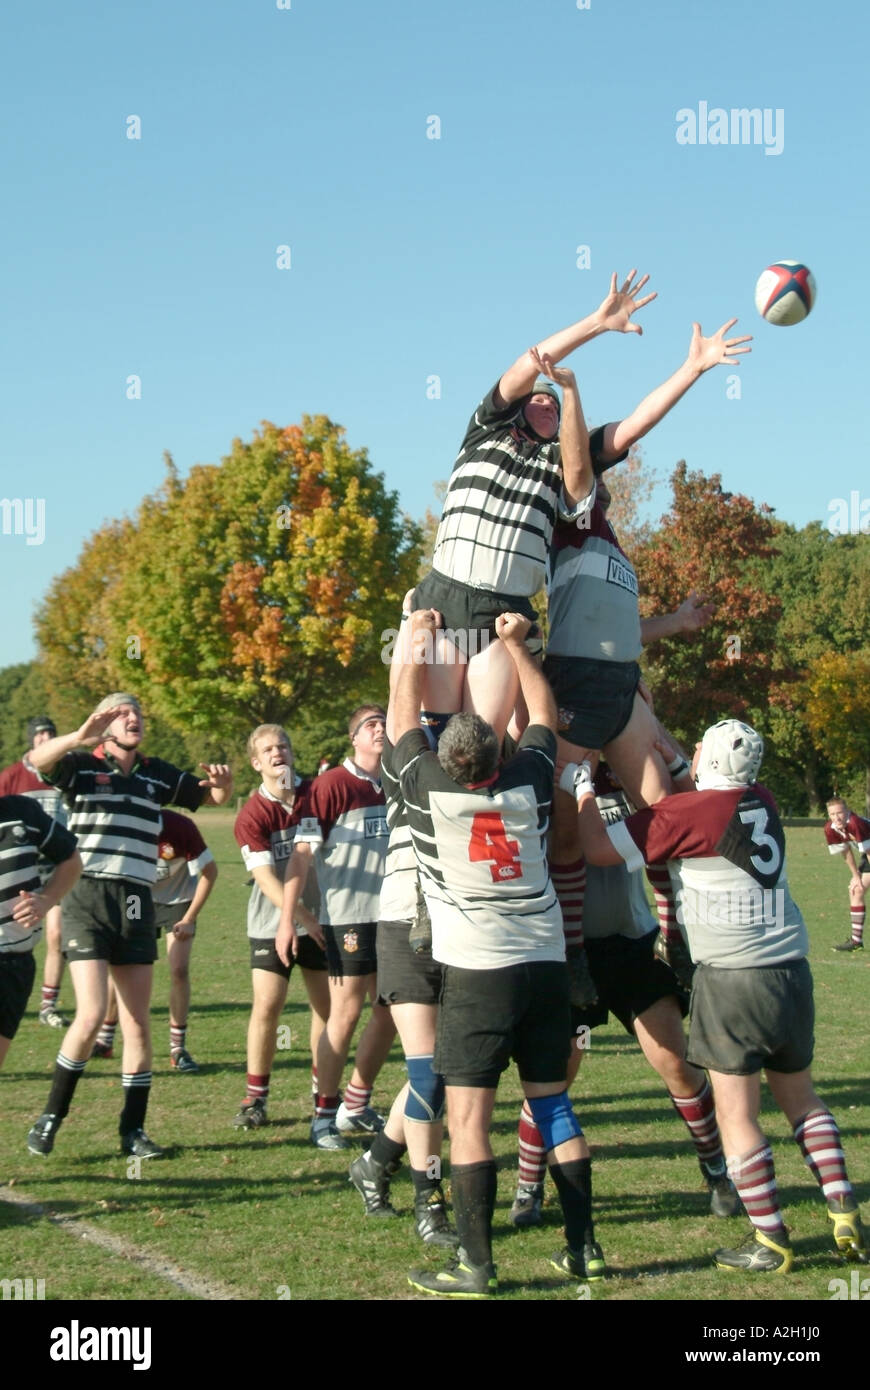 Adult team sport game amateur rugby match players in action heavy lifting in line out for ball throw in local sports park Brentwood Essex England UK Stock Photo